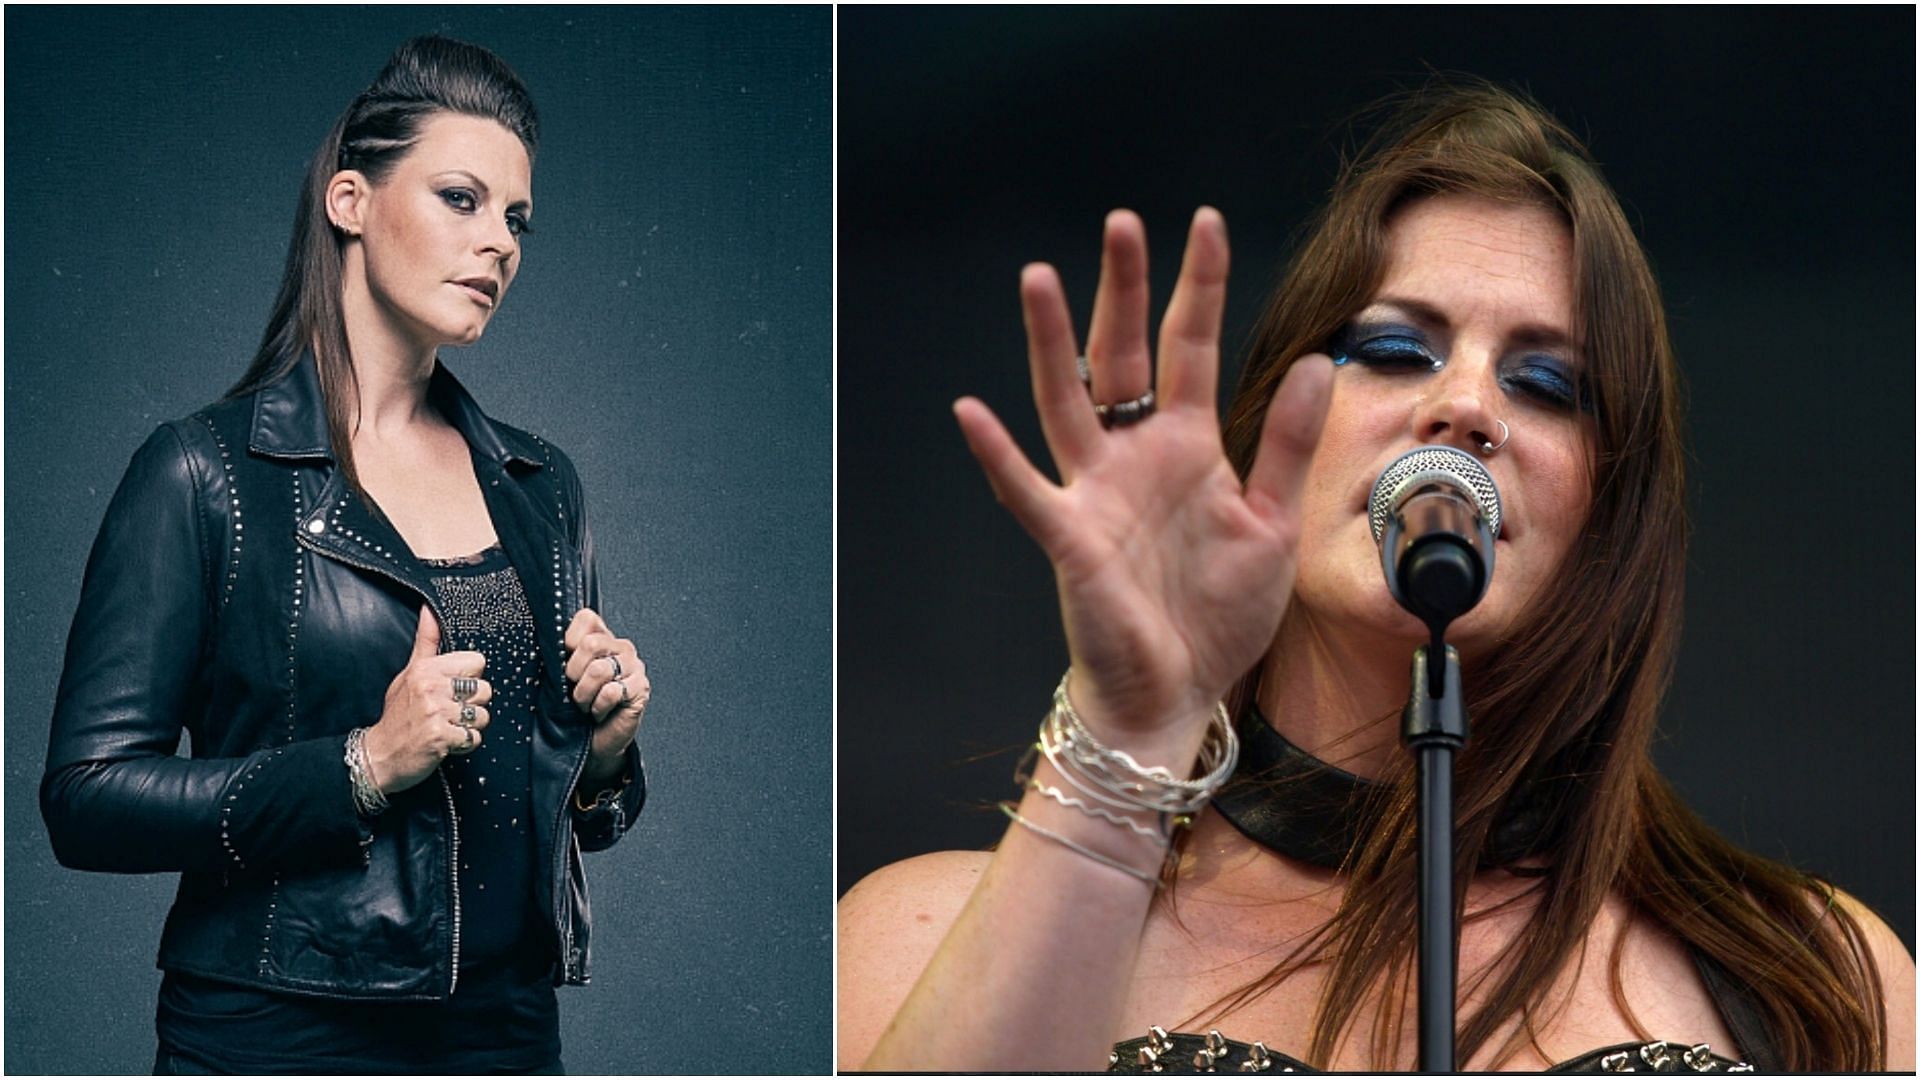 Floor Jansen has revealed that she has breast cancer. (Images via Twitter / @roxnetworktwites and @creamtheater)